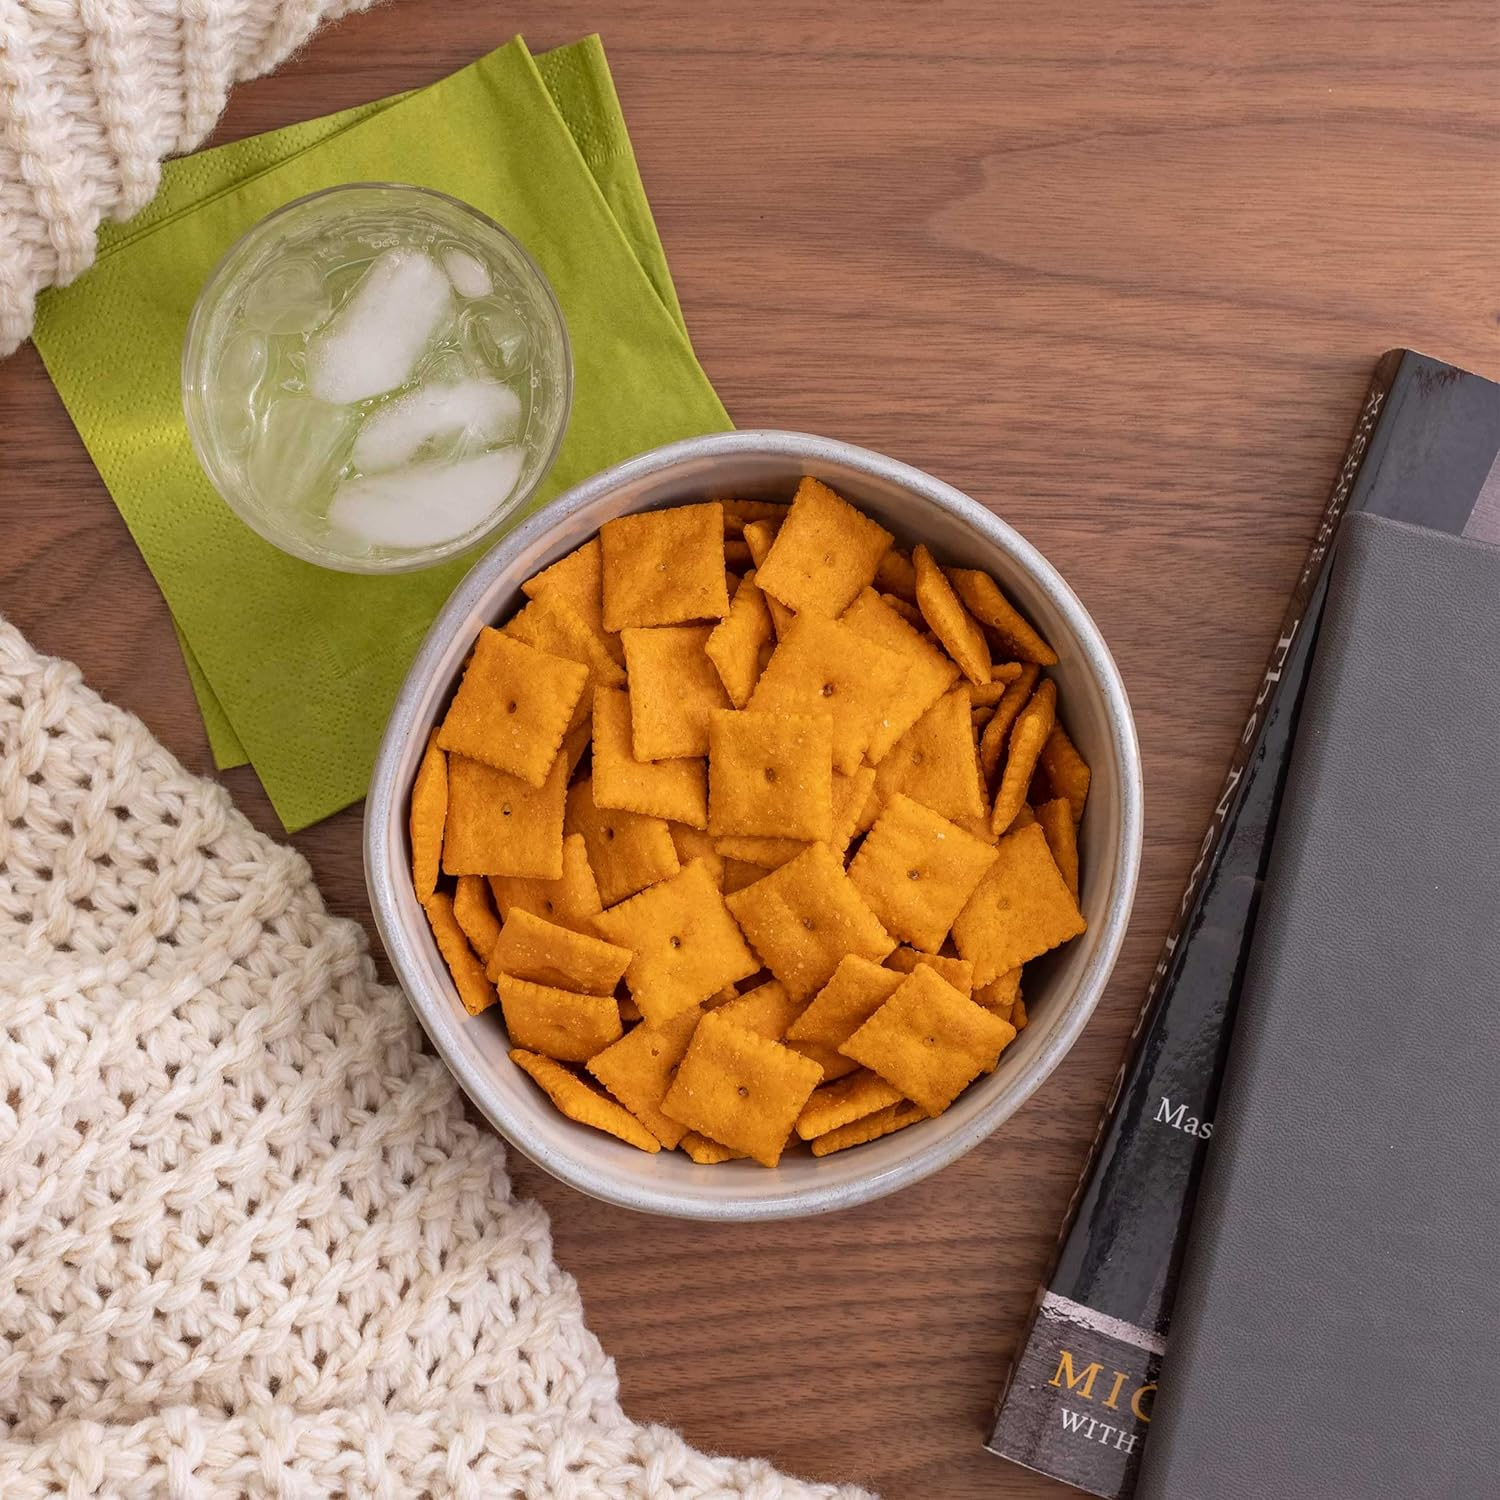 Annie's Organic Cheddar Squares, Baked Cracker Snacks